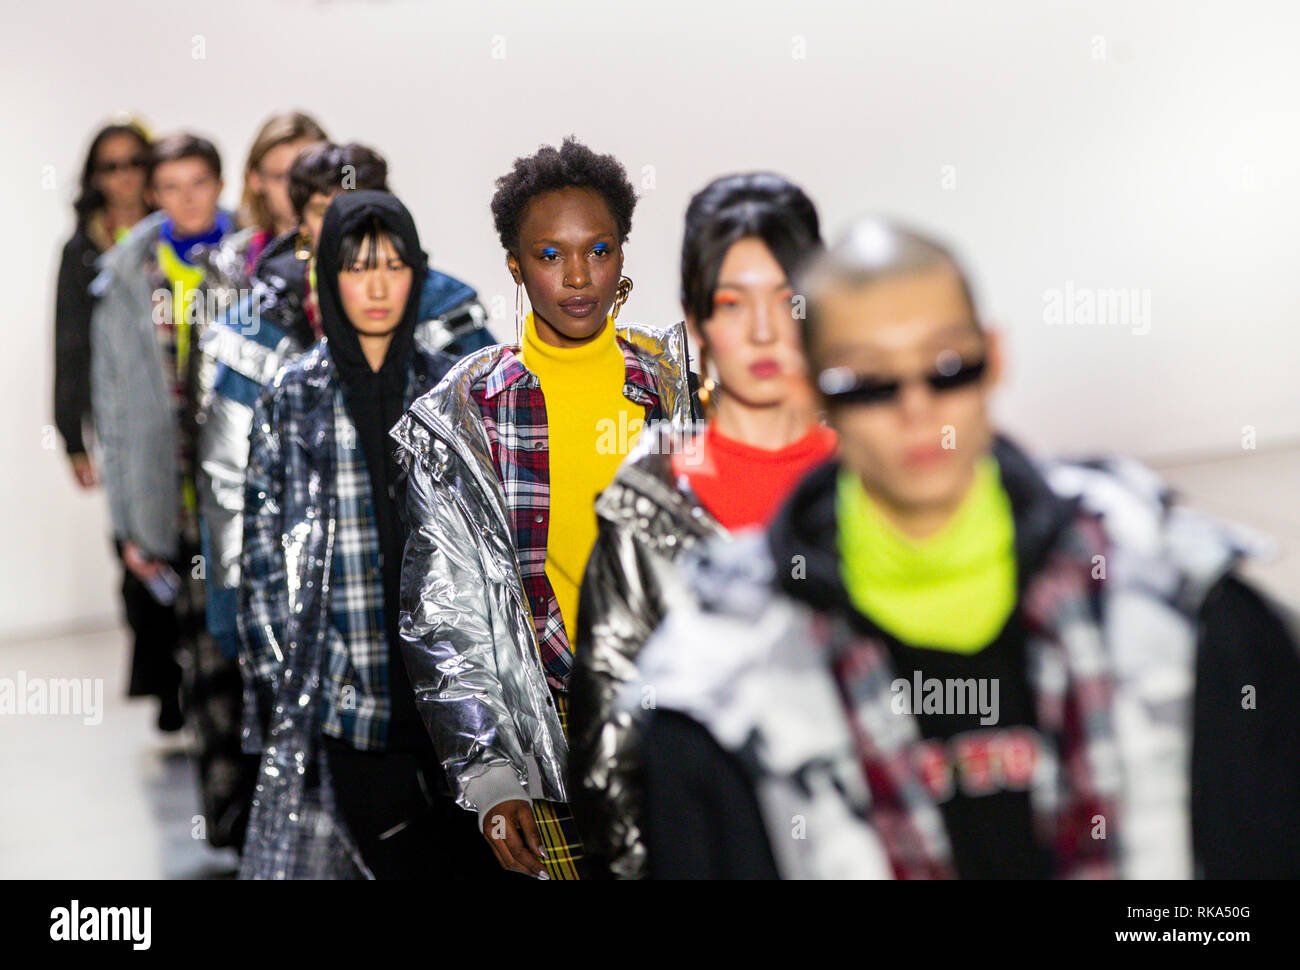 New York, USA. 9th Feb, 2019. Models present creations at the 'PONY X HARBIN' show during the New York Fashion Week in New York, the United States, Feb. 9, 2019. Popular Chinese brand Harbin Beer on Saturday put on an experimental show that blended traditional Chinese culture and American street art at the ongoing New York fashion week. The show started with a short music piece that was a fusion of Peking Opera and R&B, followed by a catwalk show debuting collection jointly presented by Harbin Beer and American sports brand PONY. Credit: Wang Ying/Xinhua/Alamy Live News Stock Photo